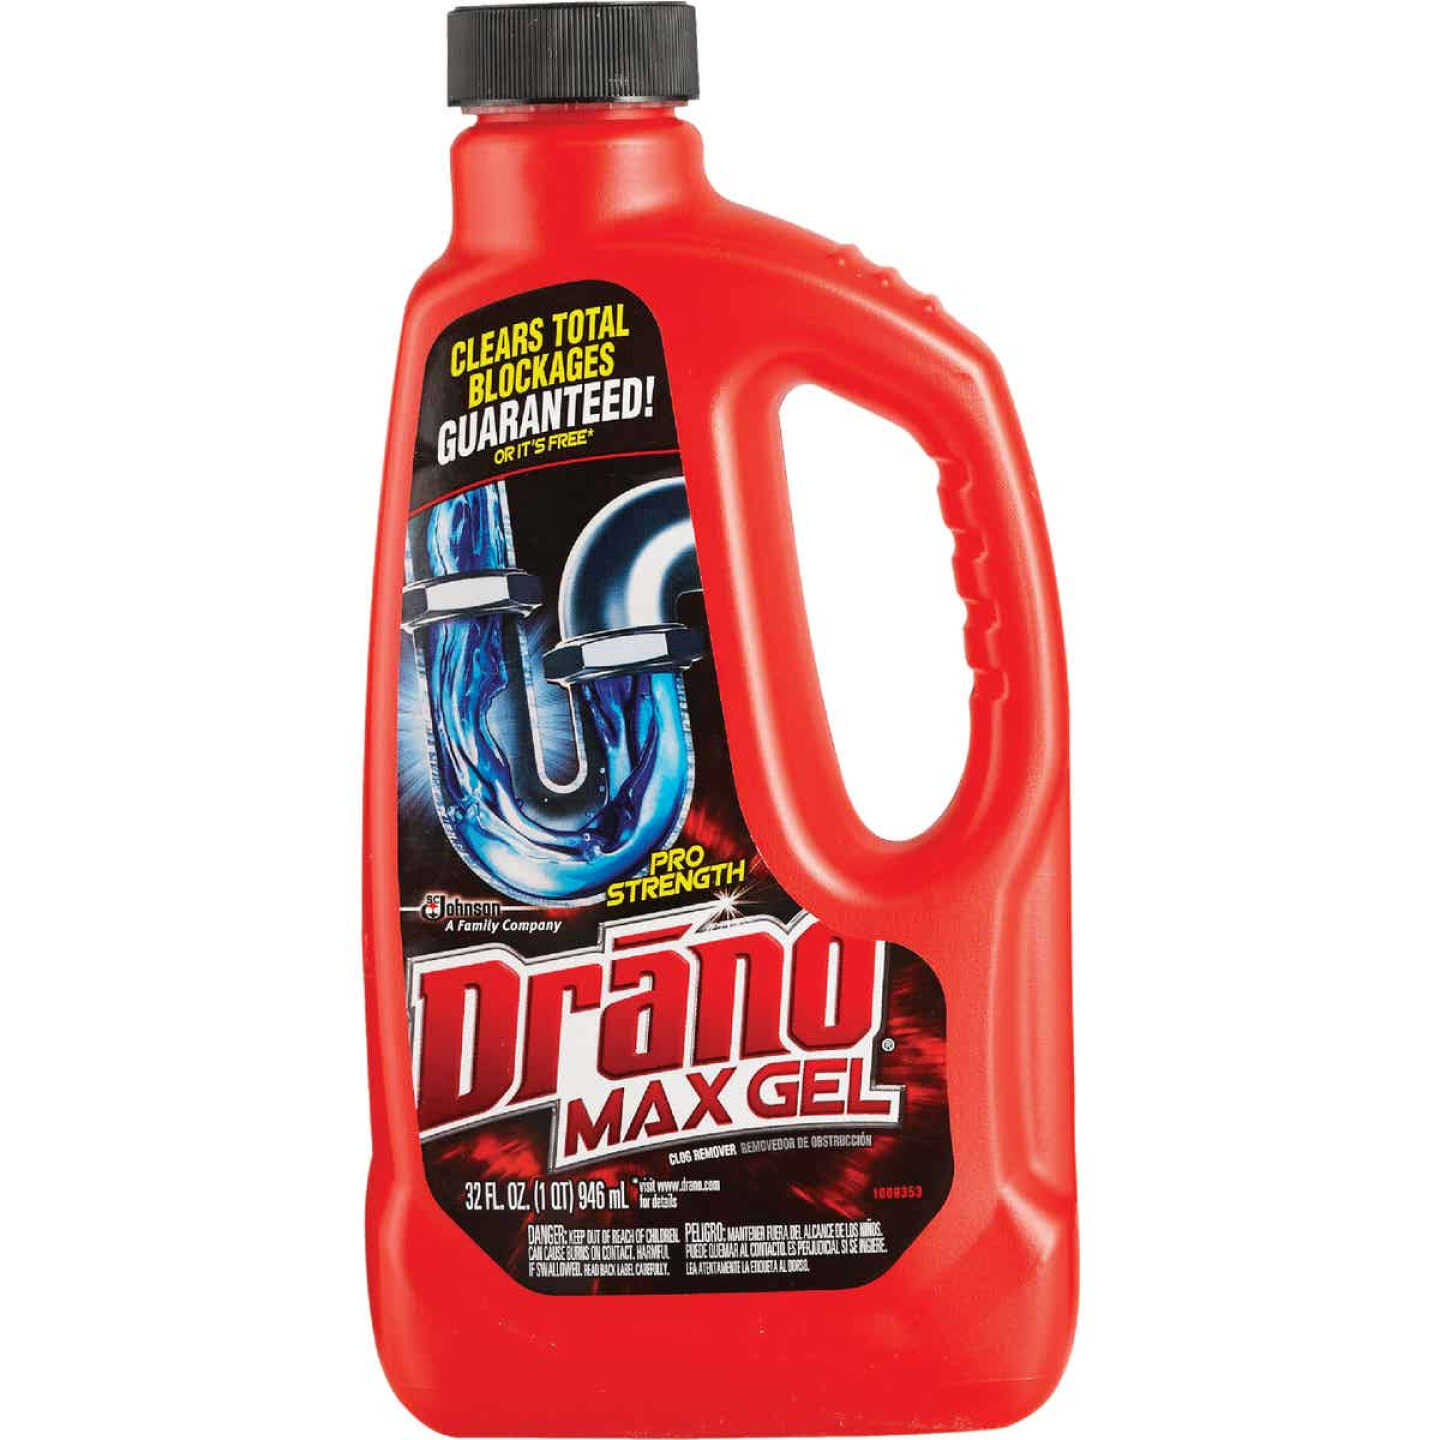 Drano Dual-force foamer Clog Remover 17-fl oz Drain Cleaner in the Drain  Cleaners department at